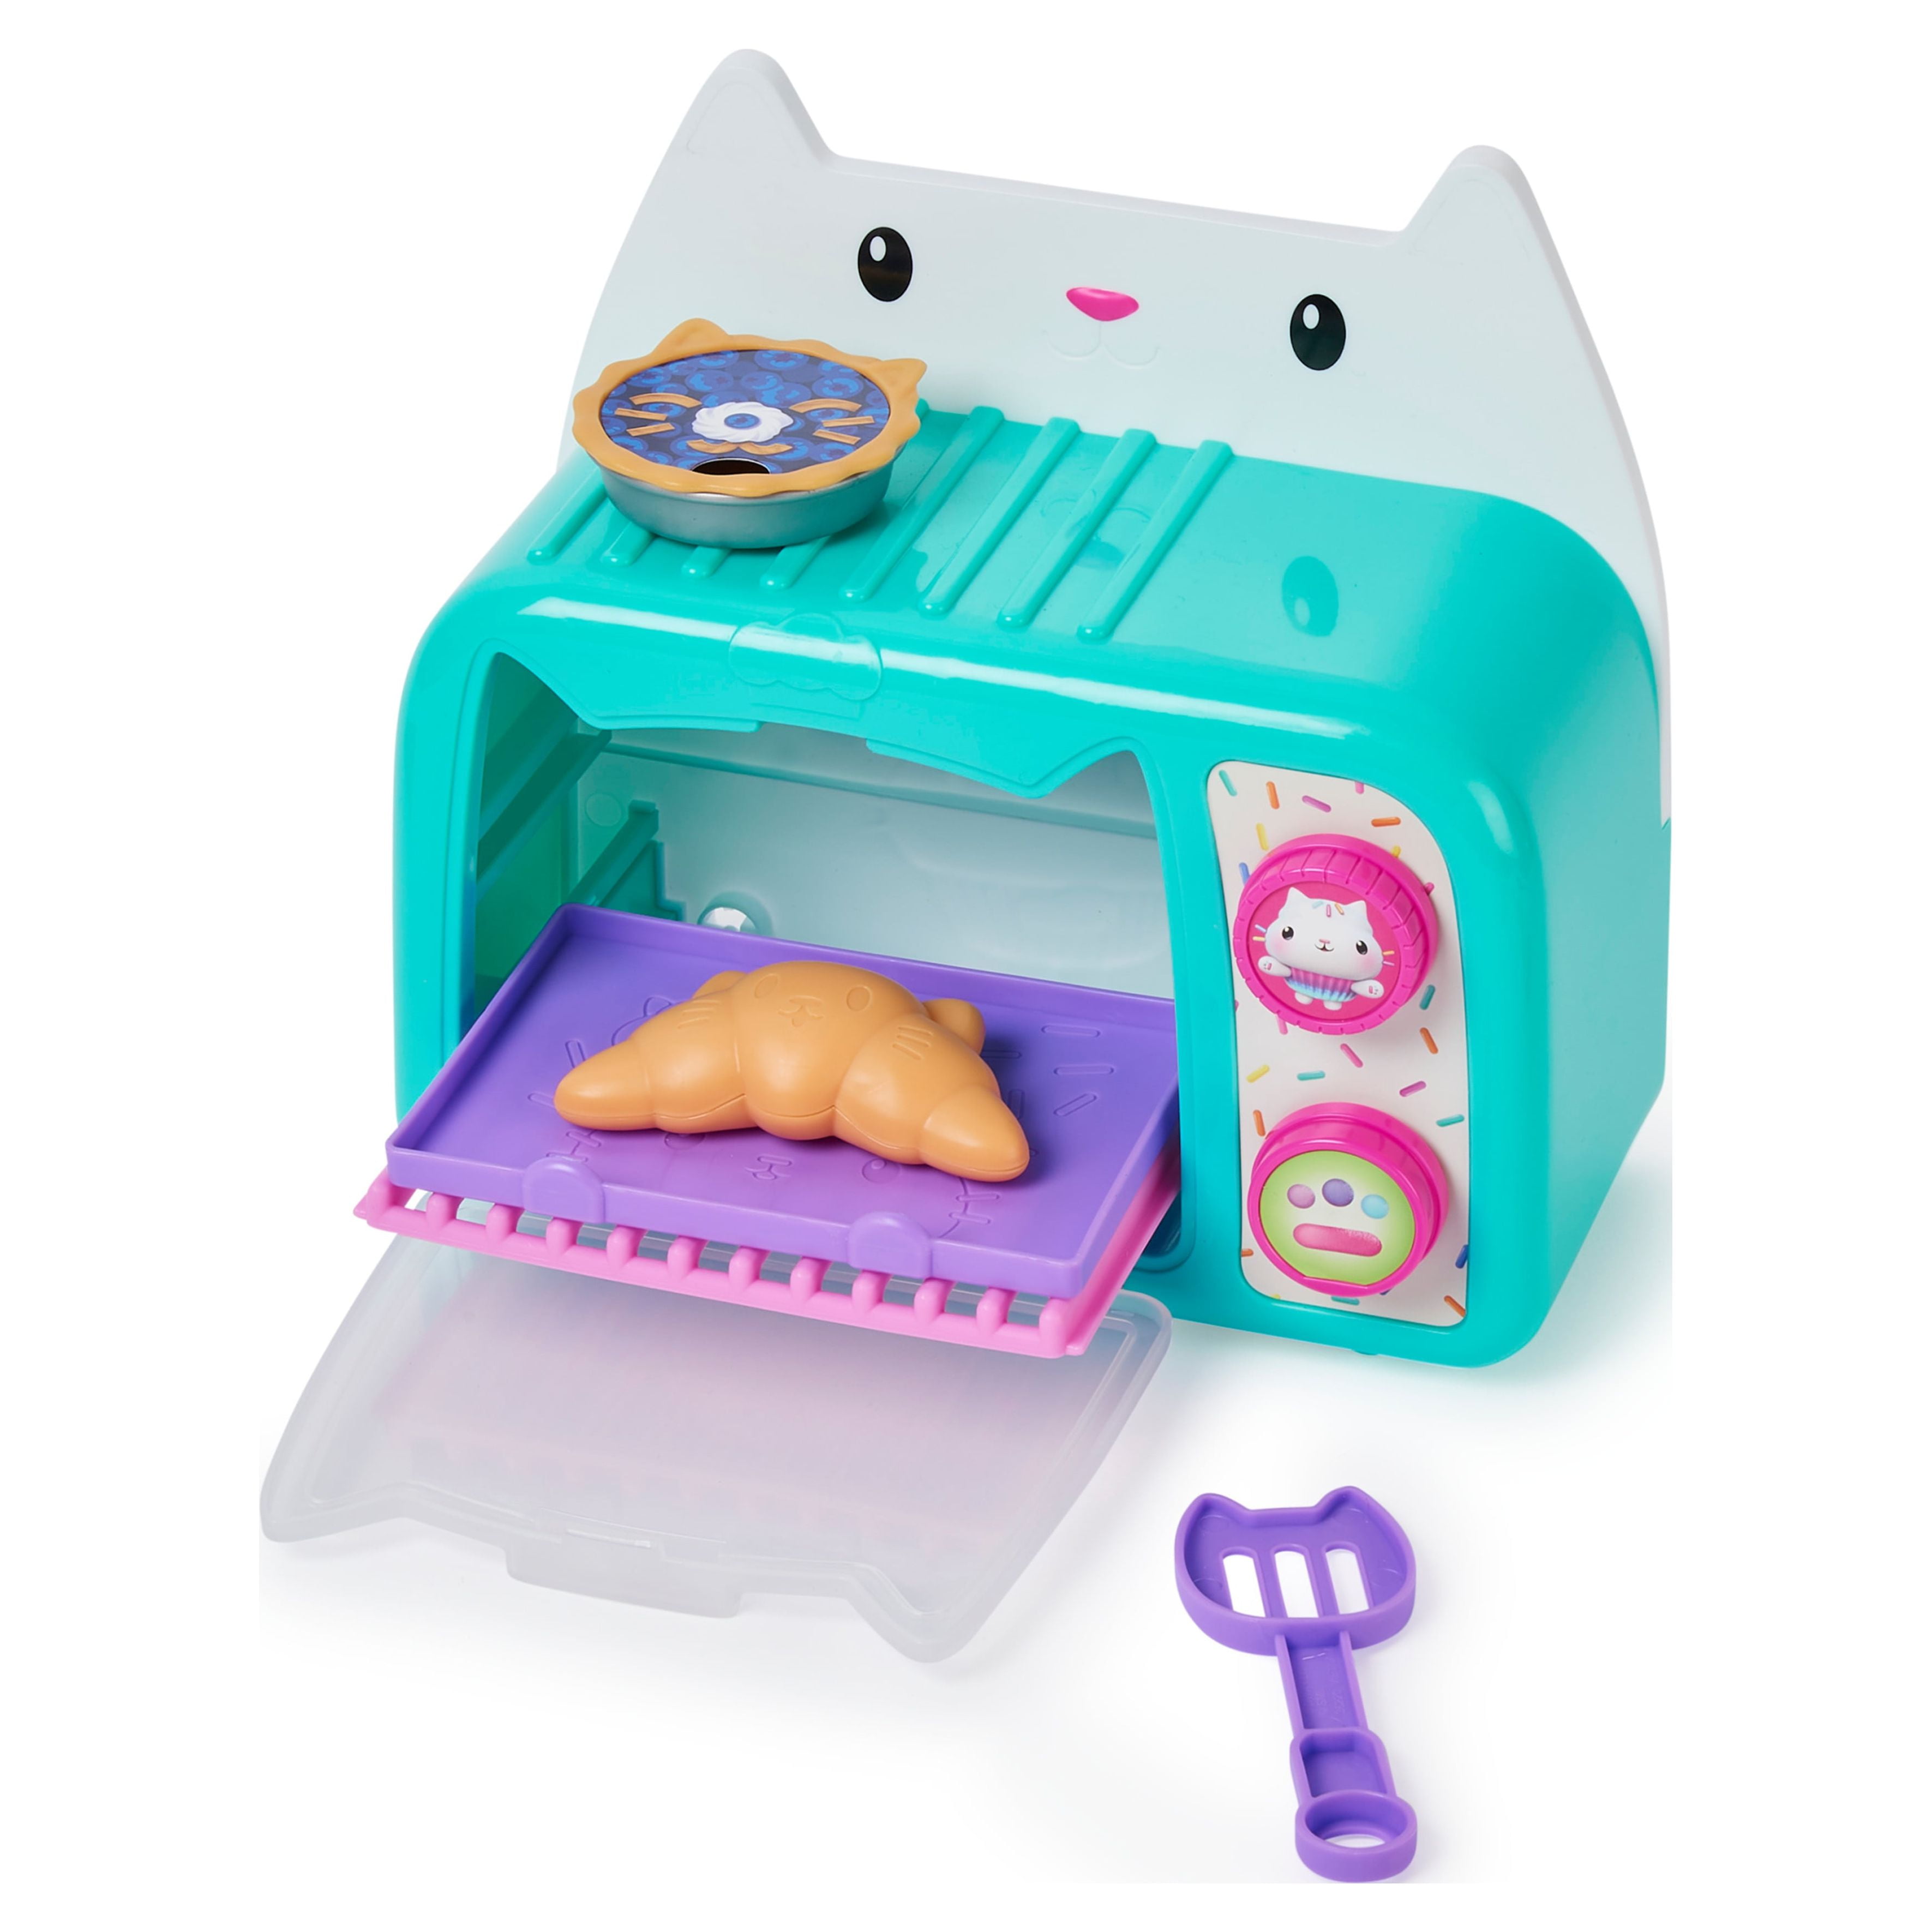 Electronic magic toy oven baking bread rolls muffins sparkling cupcakes  cozy village 